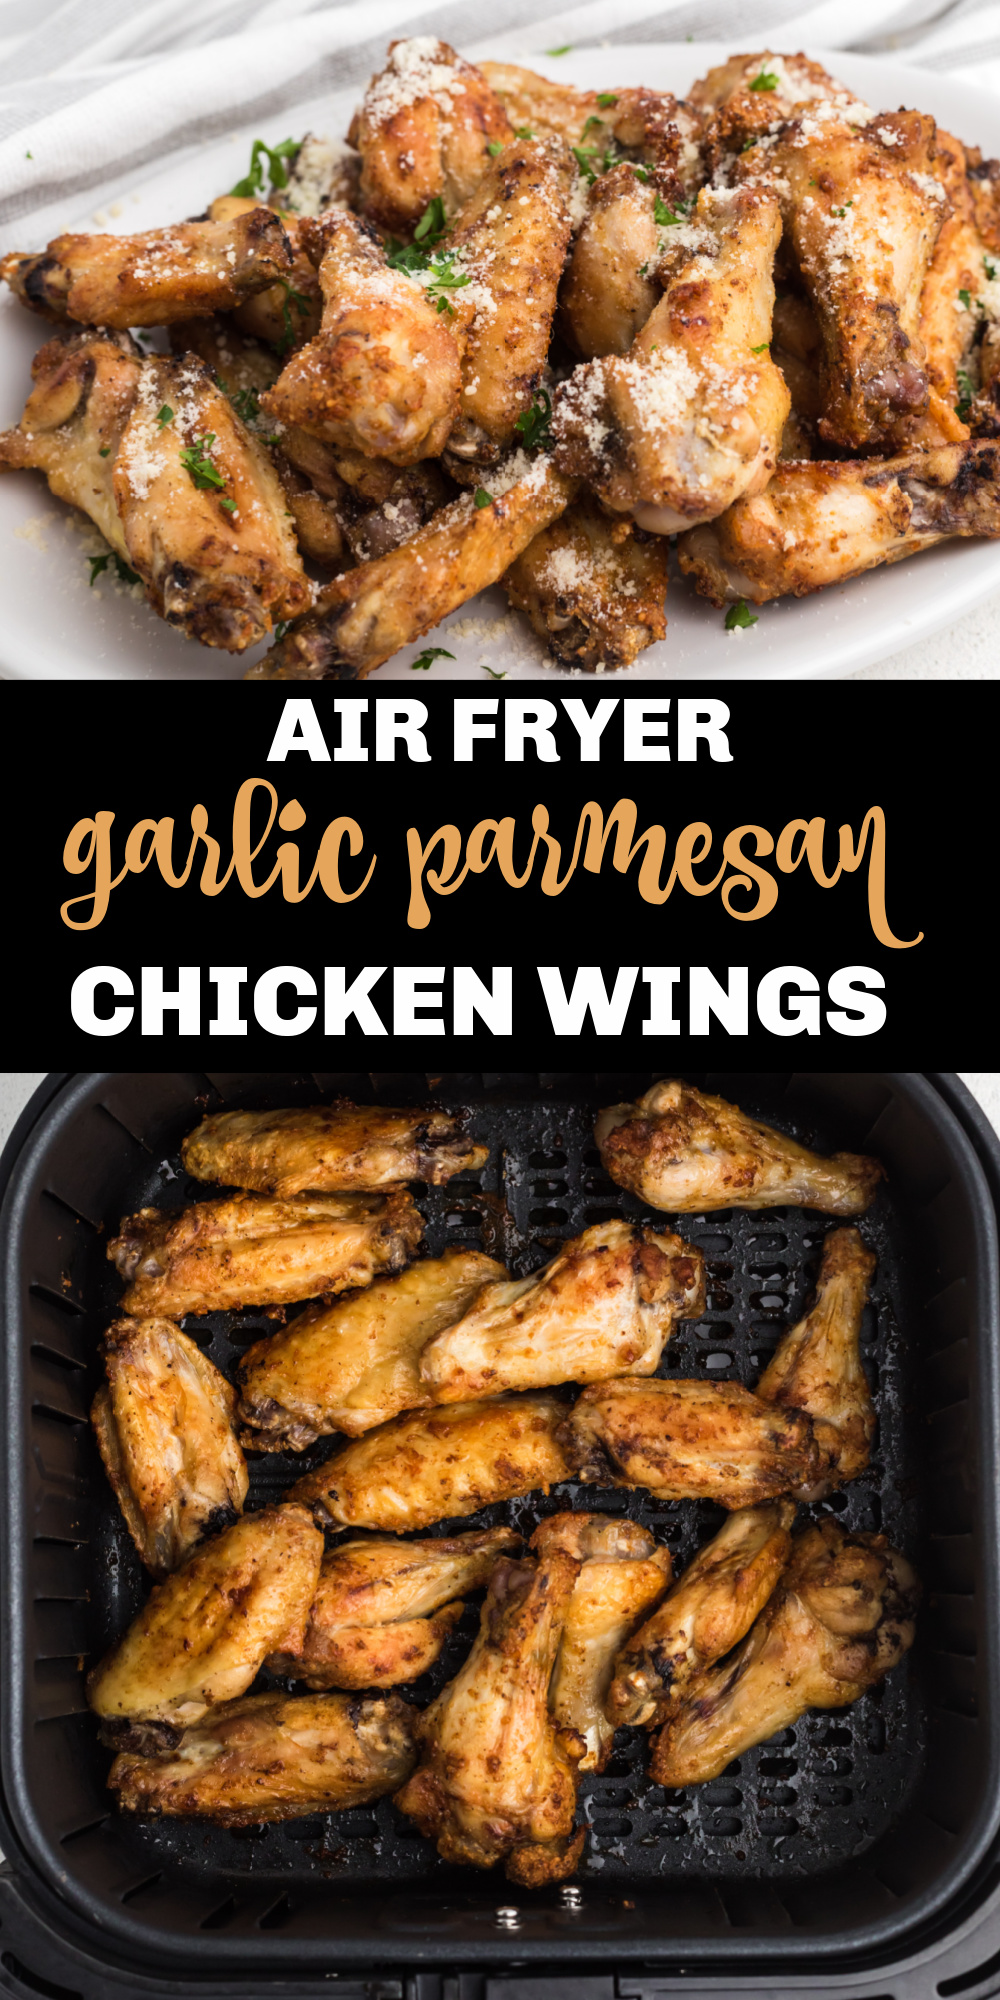 Air Fryer Garlic Parmesan Chicken Wings are one of my favorite appetizers! Made with fresh wings, parmesan cheese, parsley, and more.